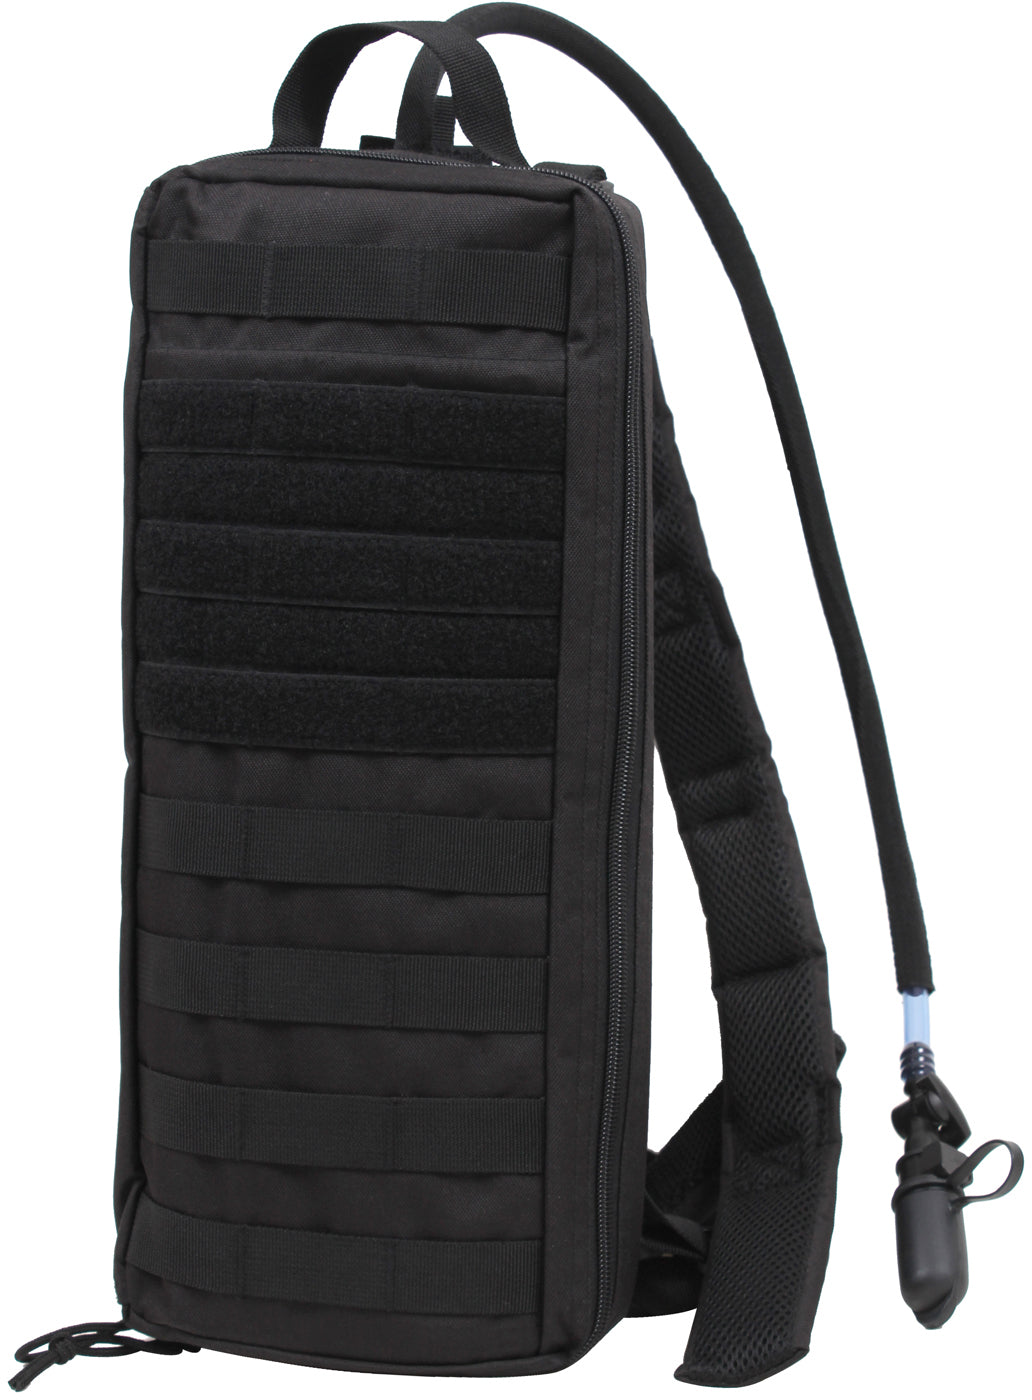 Black MOLLE Attachable Hydration Pack